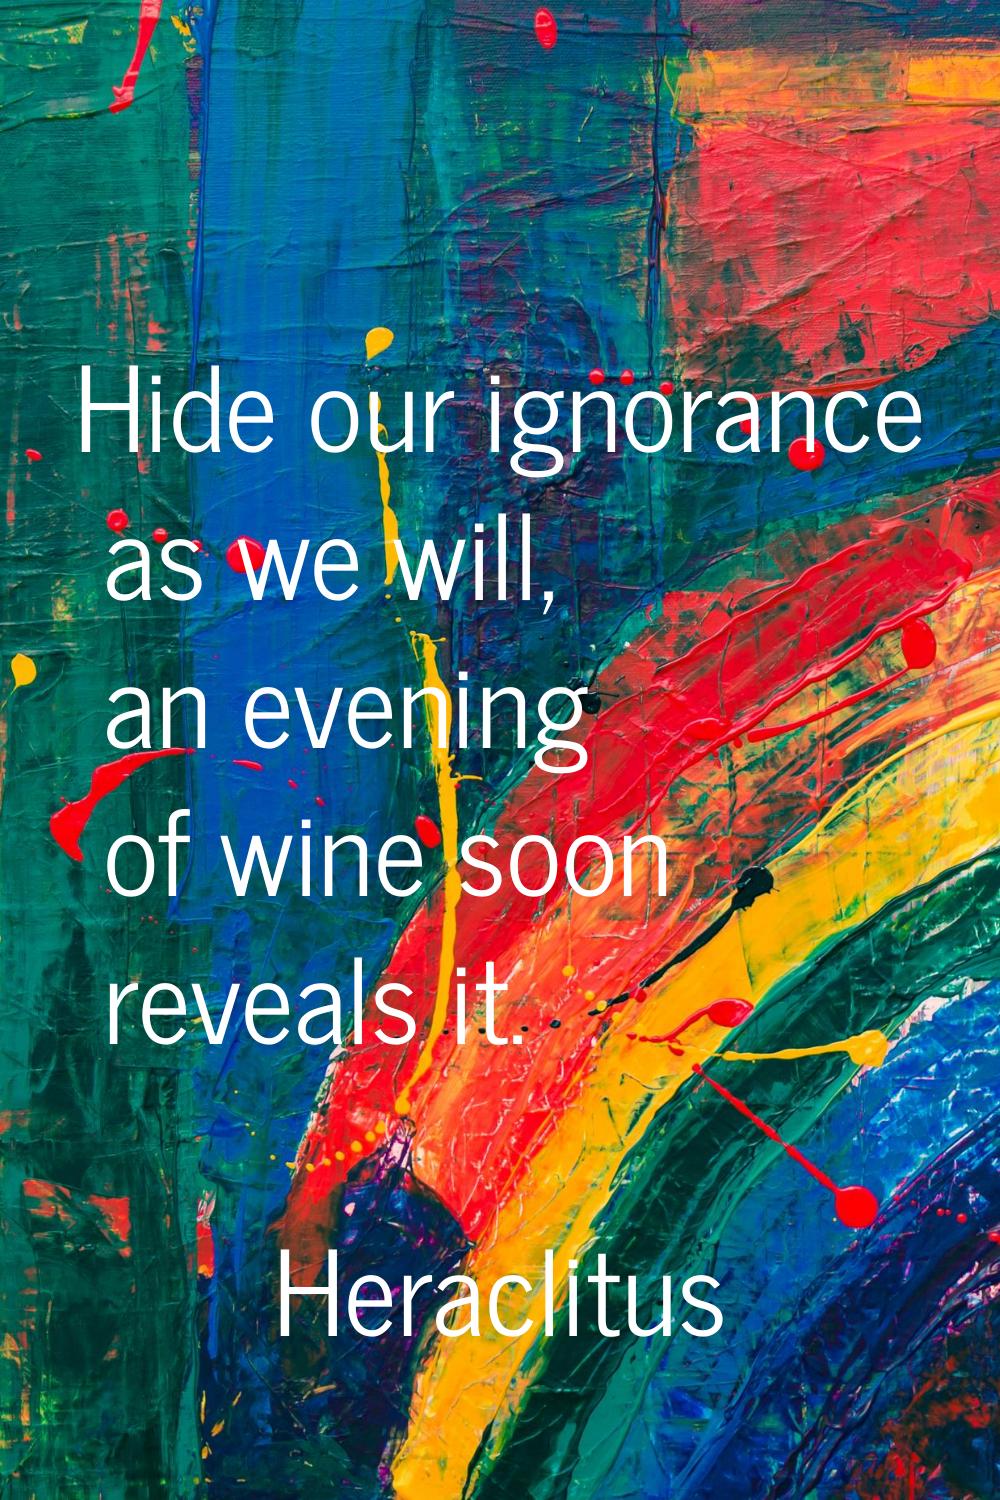 Hide our ignorance as we will, an evening of wine soon reveals it.